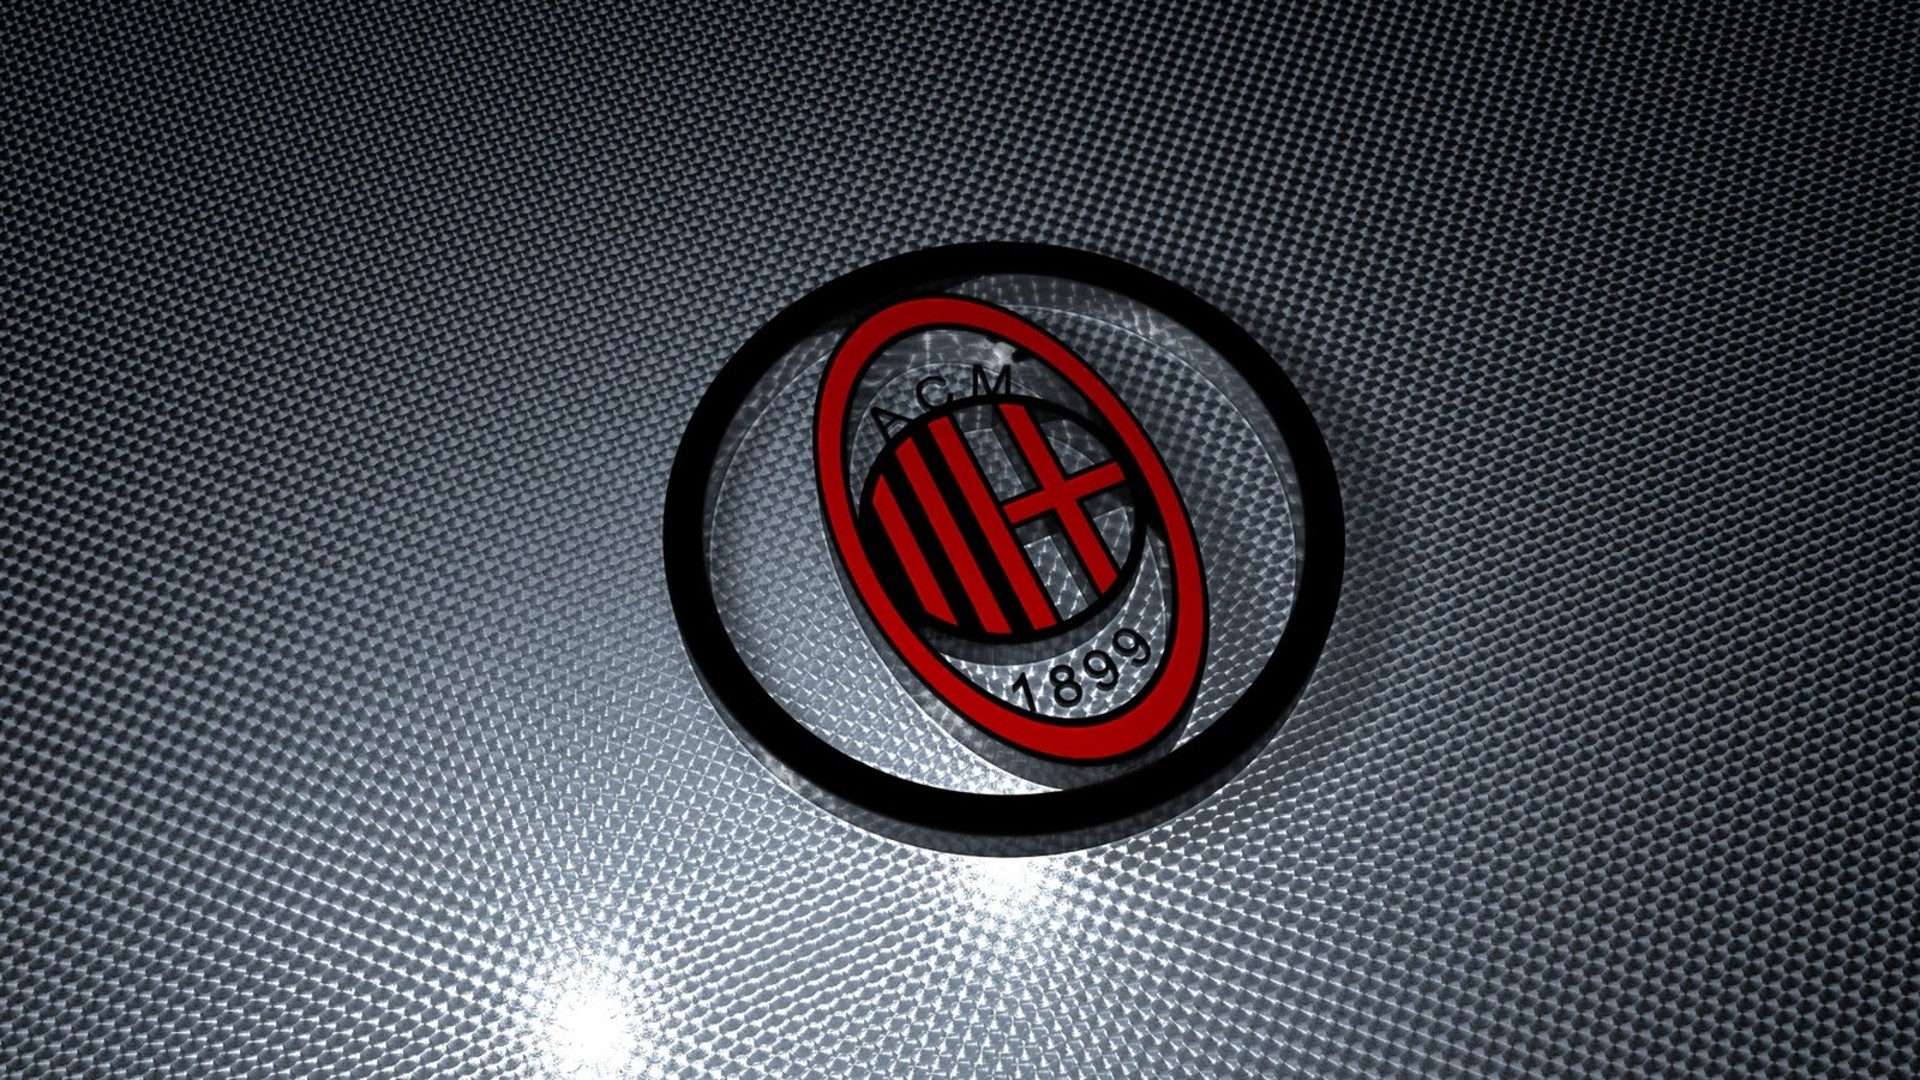 1920x1080 ac milan 3d logo hd images hd wallpapers desktop images download windows  wallpapers amazing picture artwork lovely 1920Ã1080 Wallpaper HD